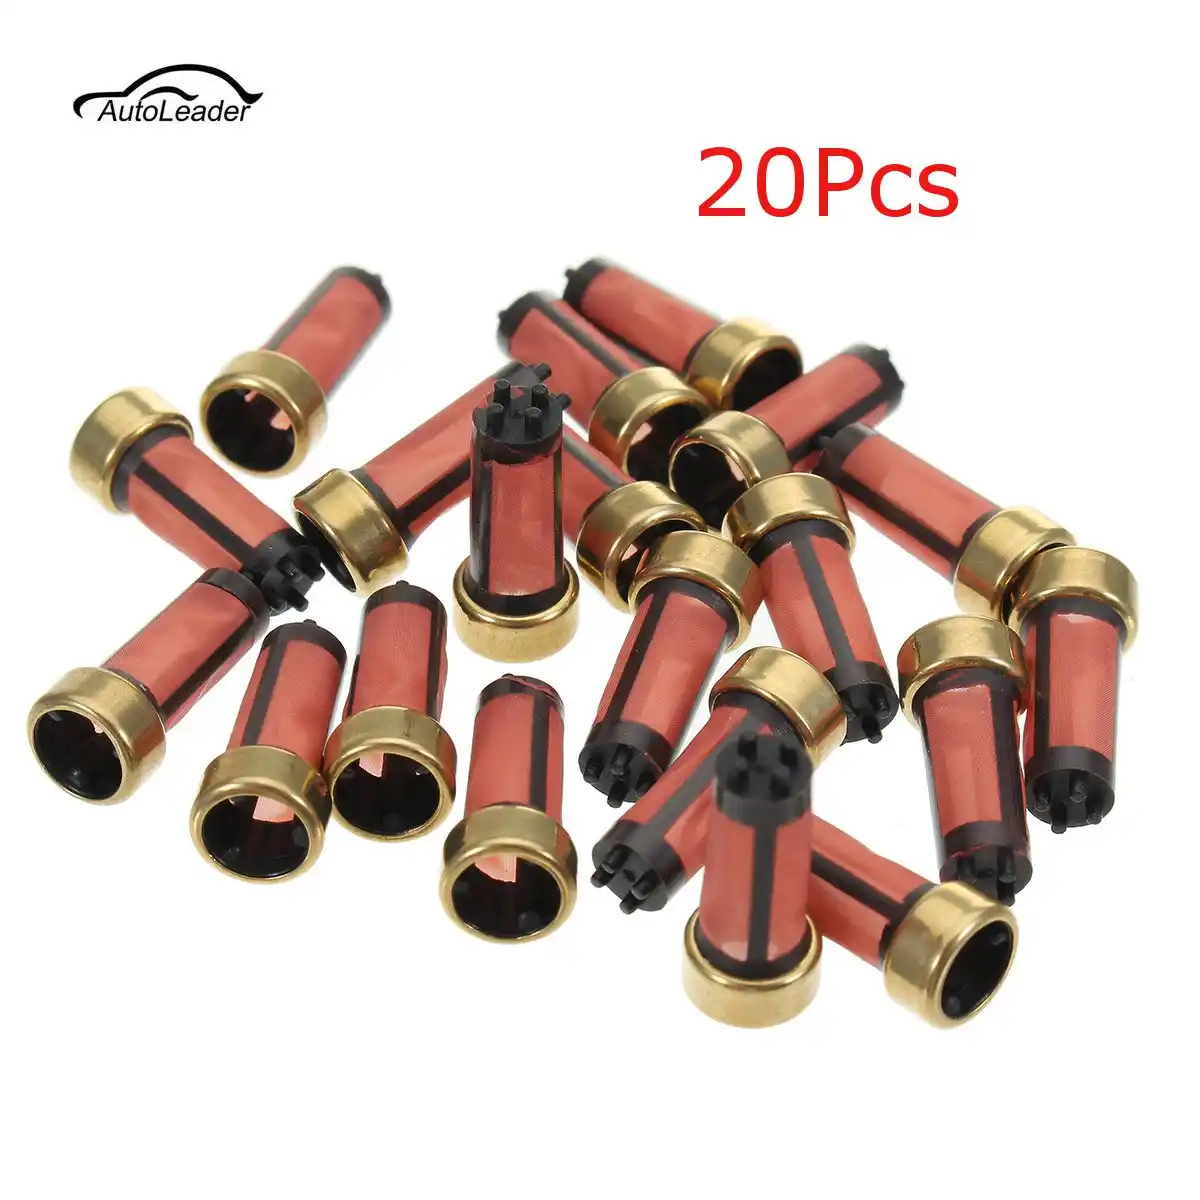 20pcs High Quality Auto Petrol Fuel Injector Micro Filter OEM MD619962 14*6*3 mm 